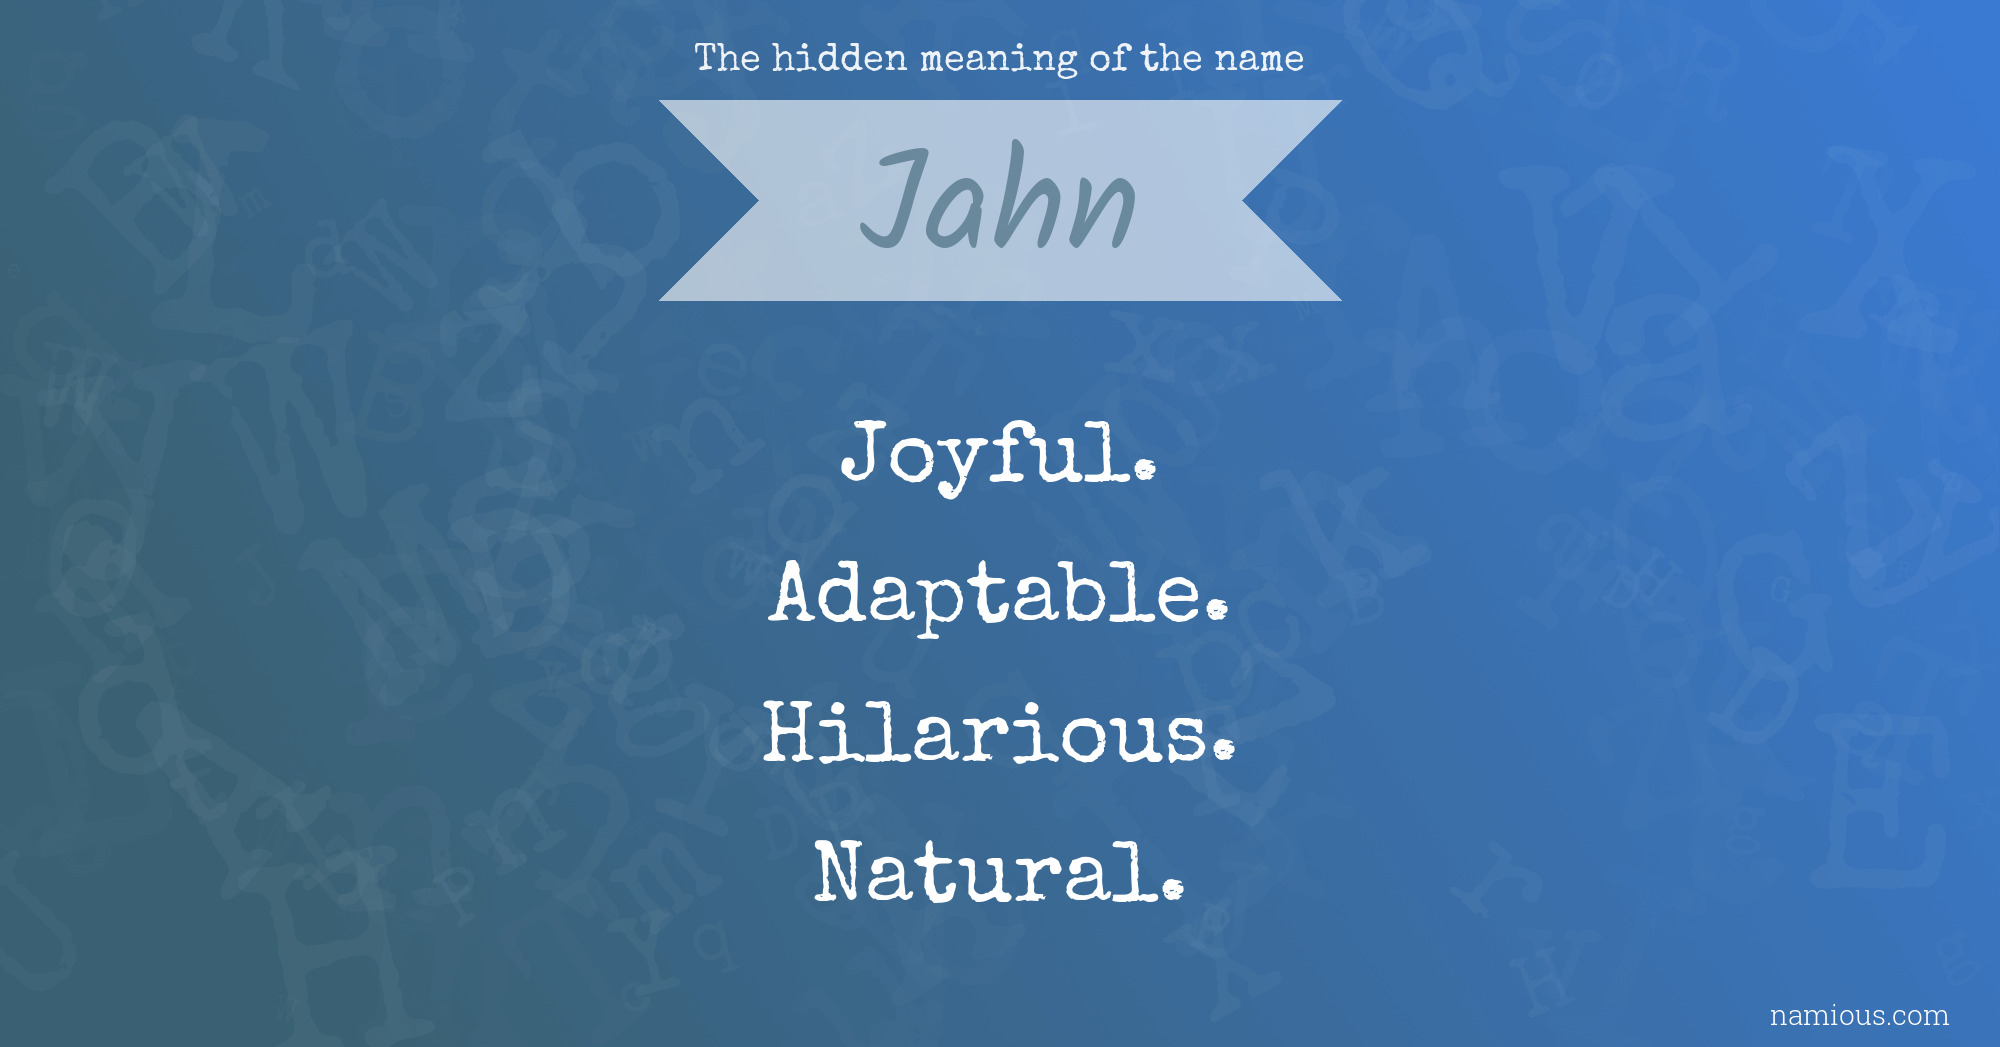 The hidden meaning of the name Jahn